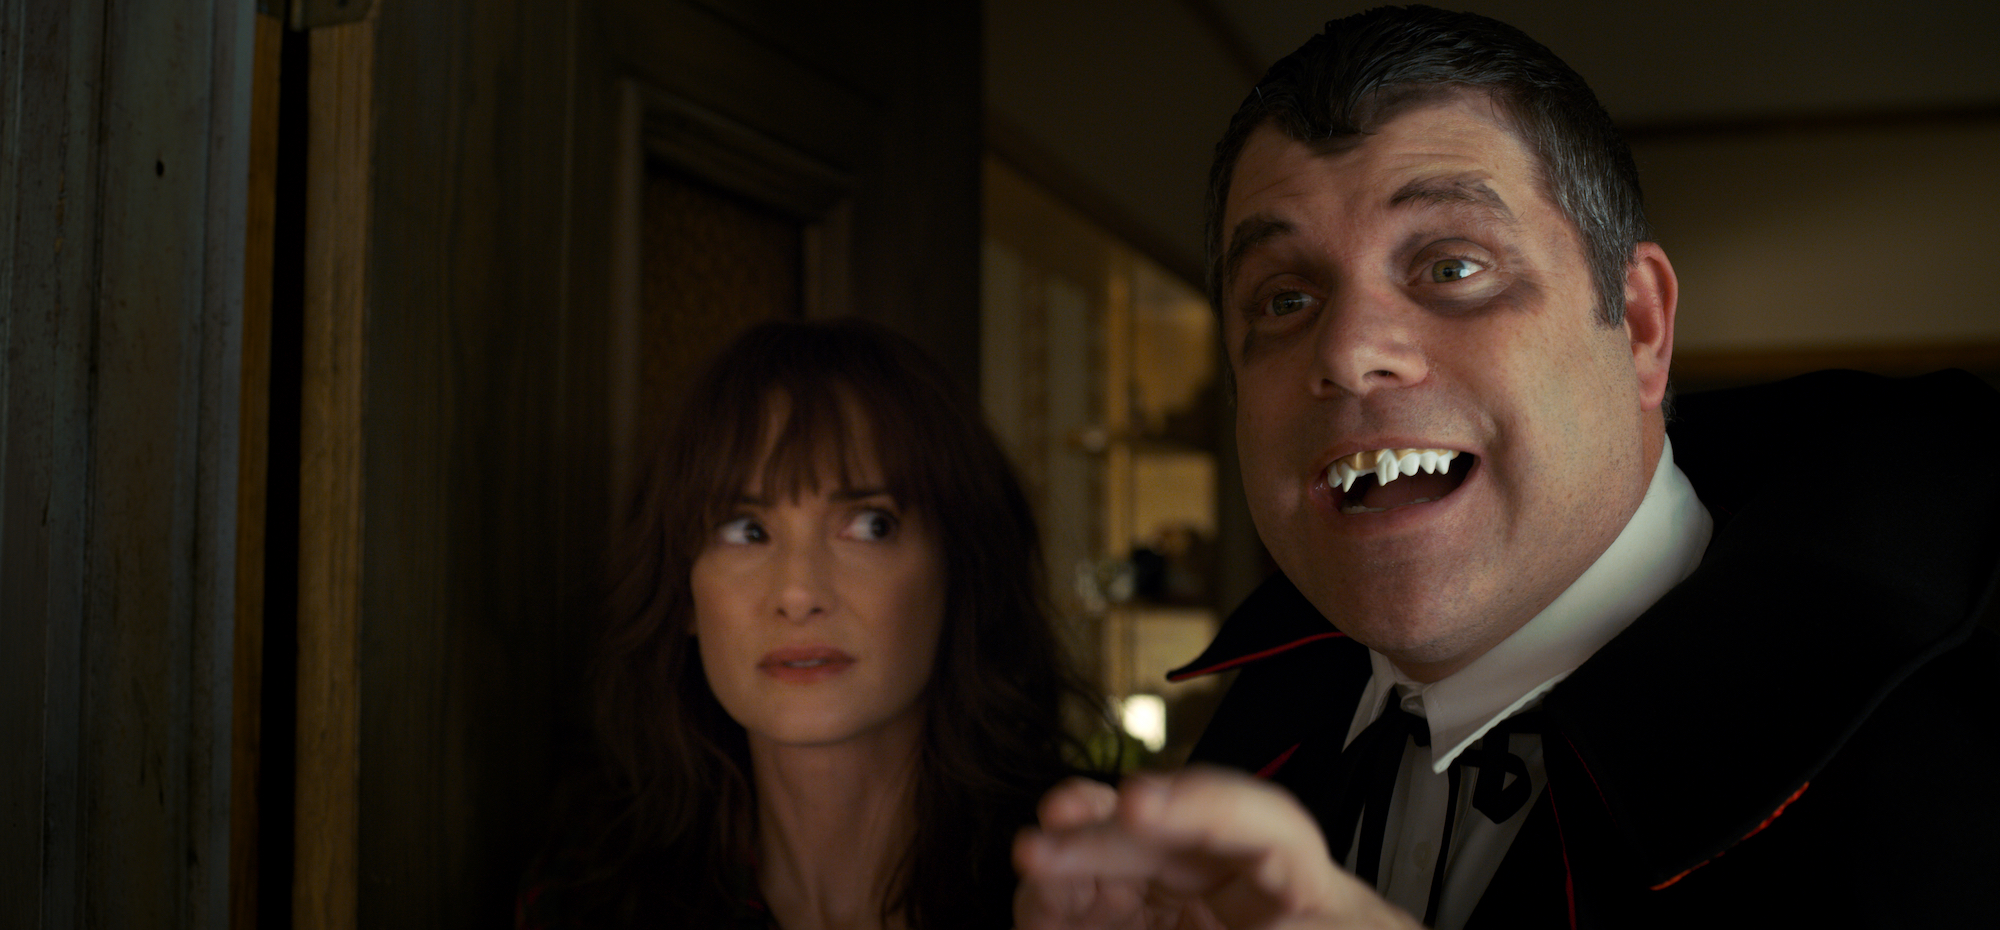 Sean Astin and Winona Ryder as Bob Newby and Joyce Byers in a production still from 'Stranger Things' Season 2